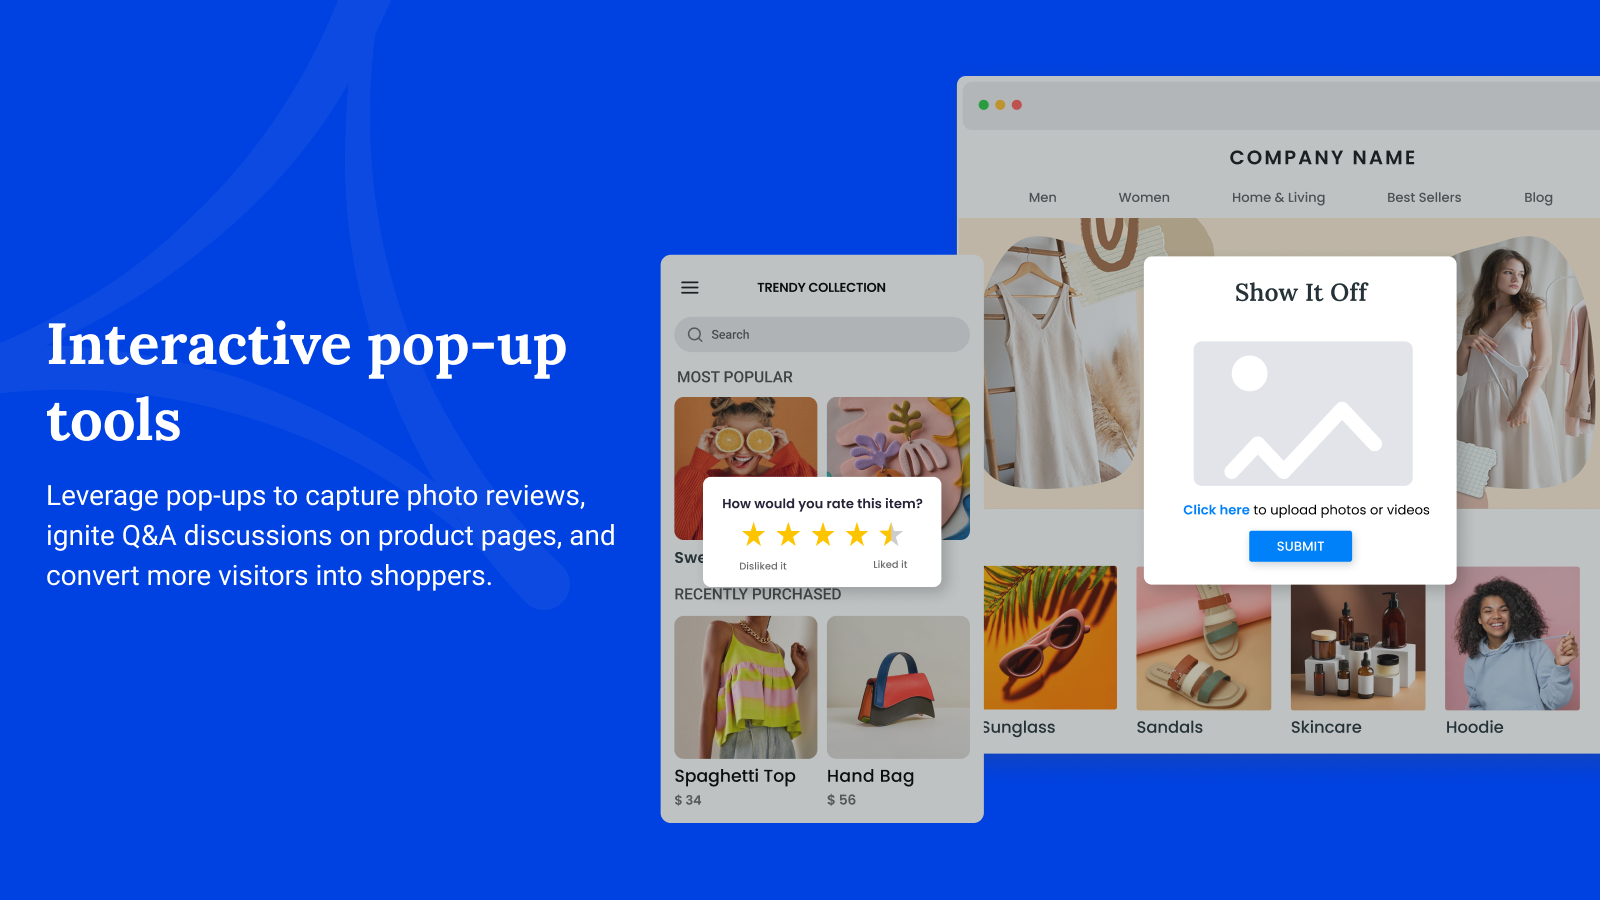 Leverage pop-ups to capture photo reviews on product pages